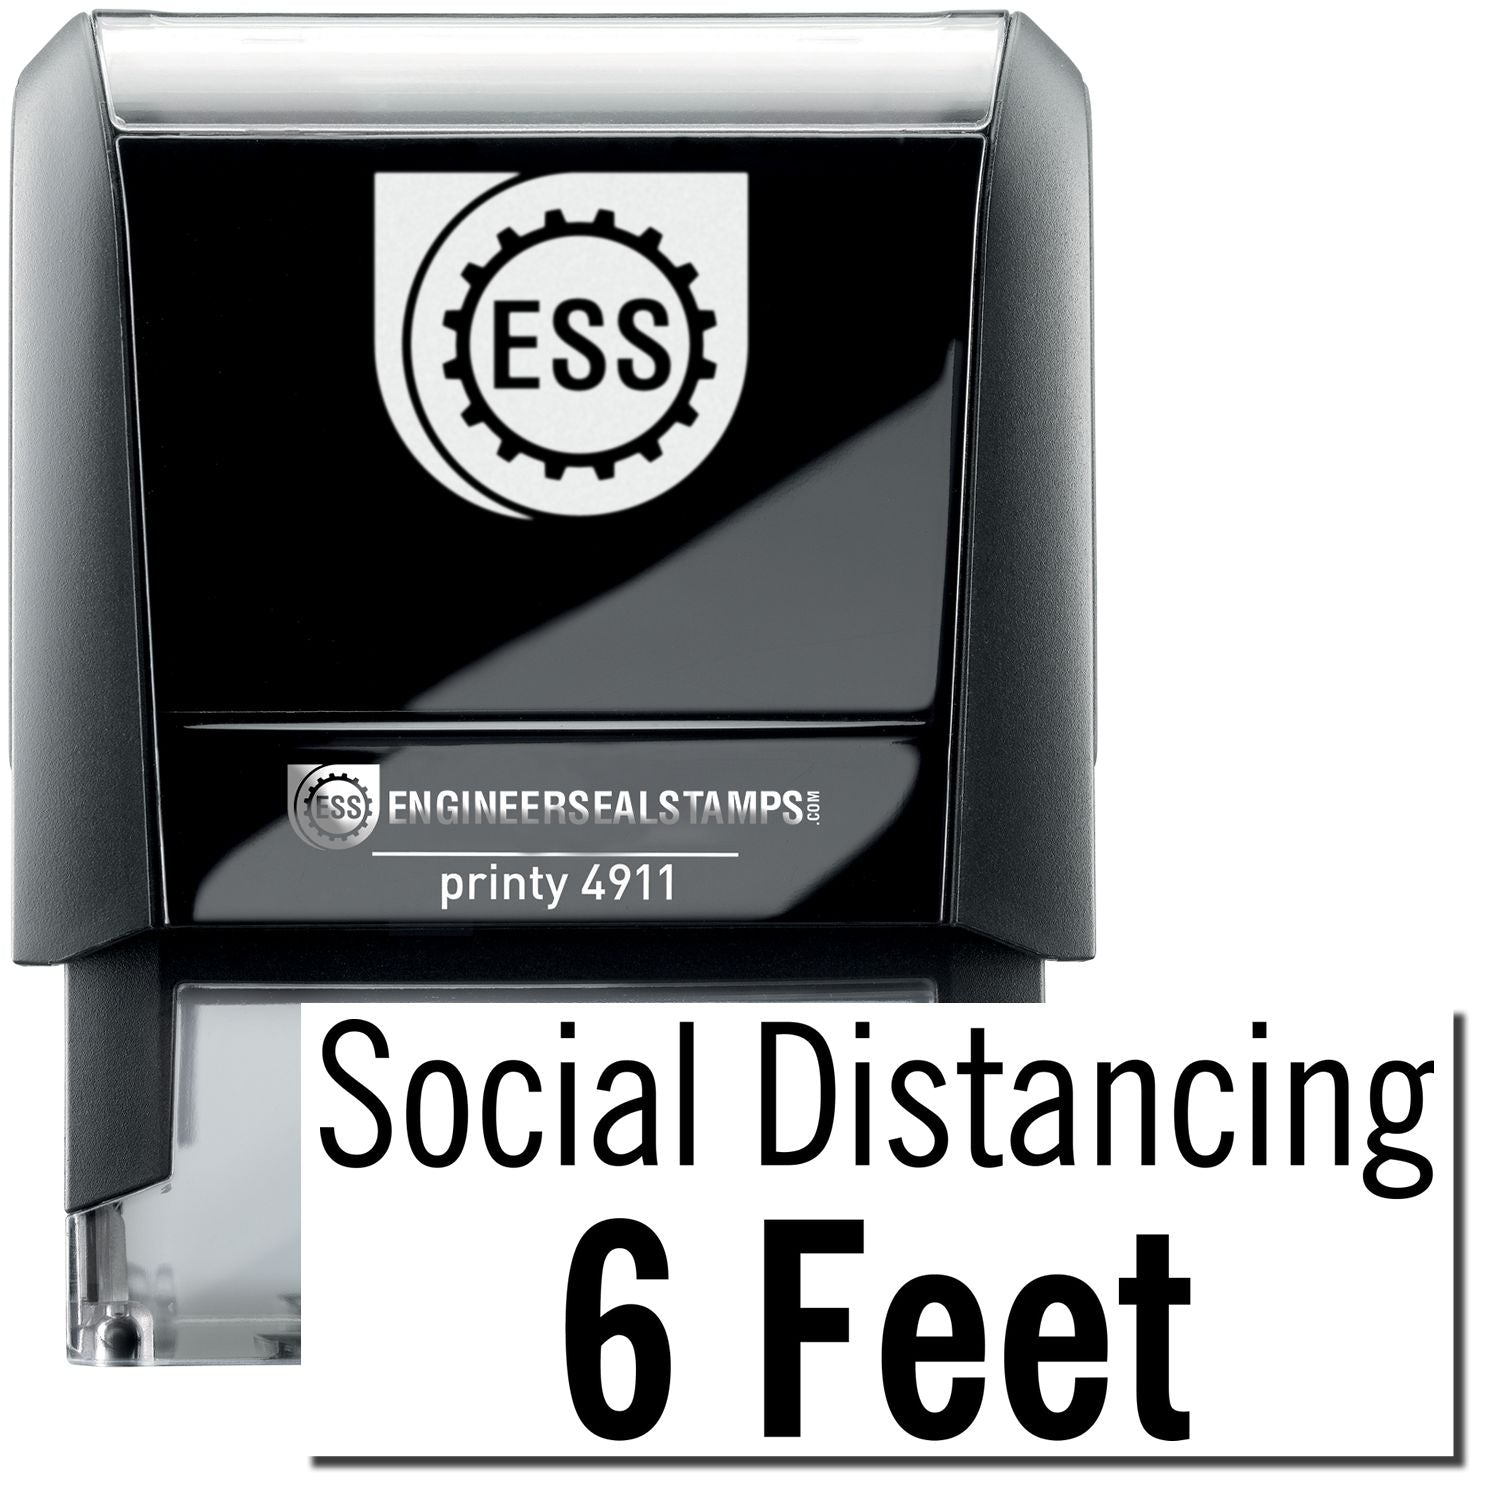 A self-inking stamp with a stamped image showing how the text "Social Distancing 6 Feet" is displayed after stamping.